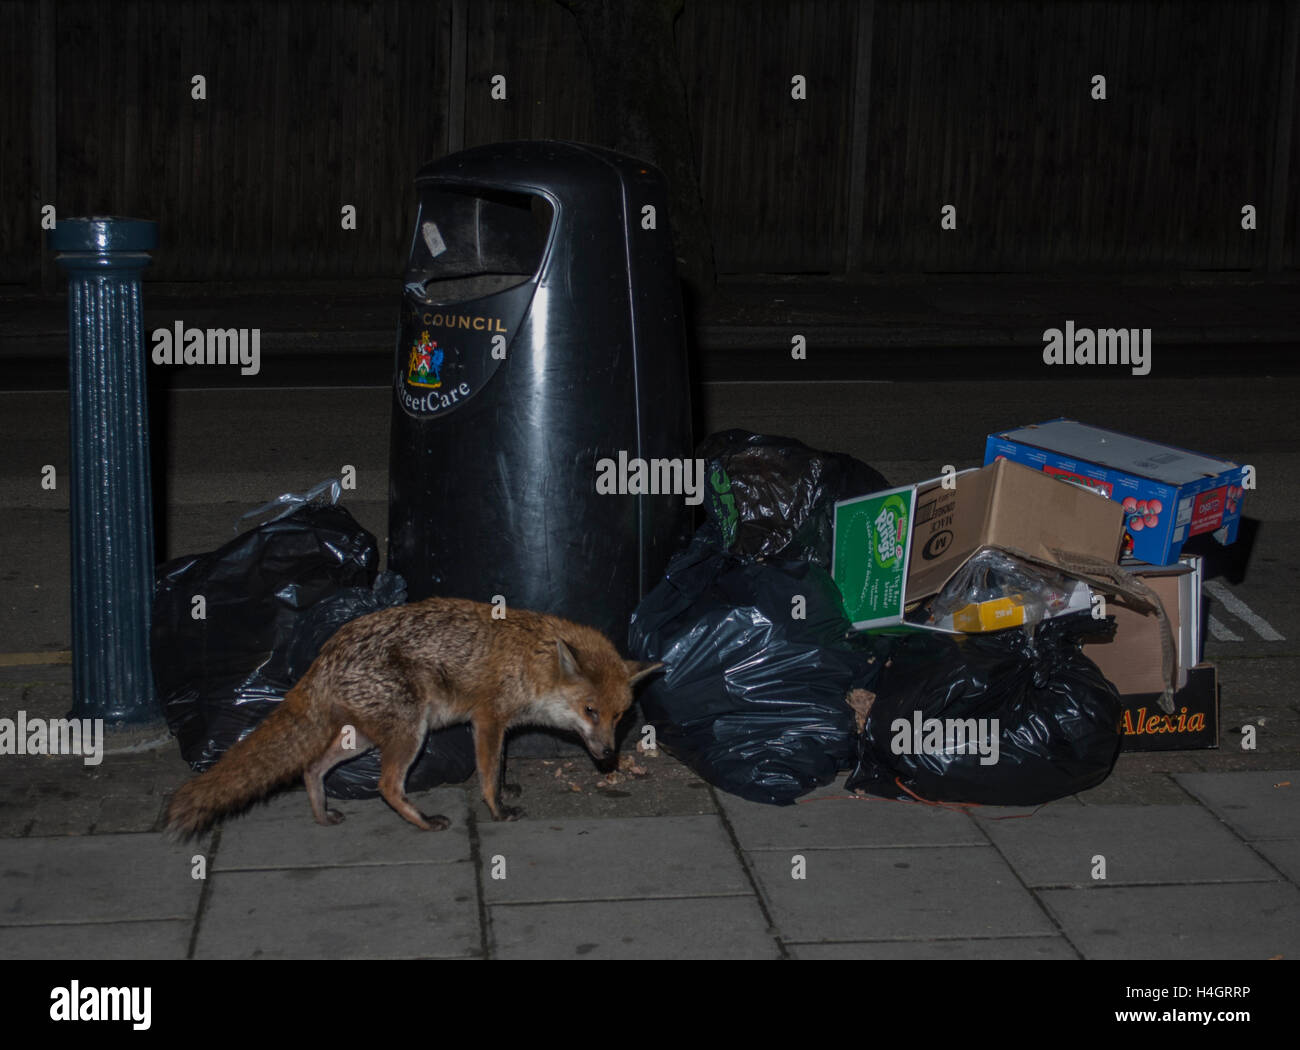 Urban Red Fox, (Vulpes vulpes), searches rubbish bags for food scraps at night in the street, London, United Kingdom Stock Photo